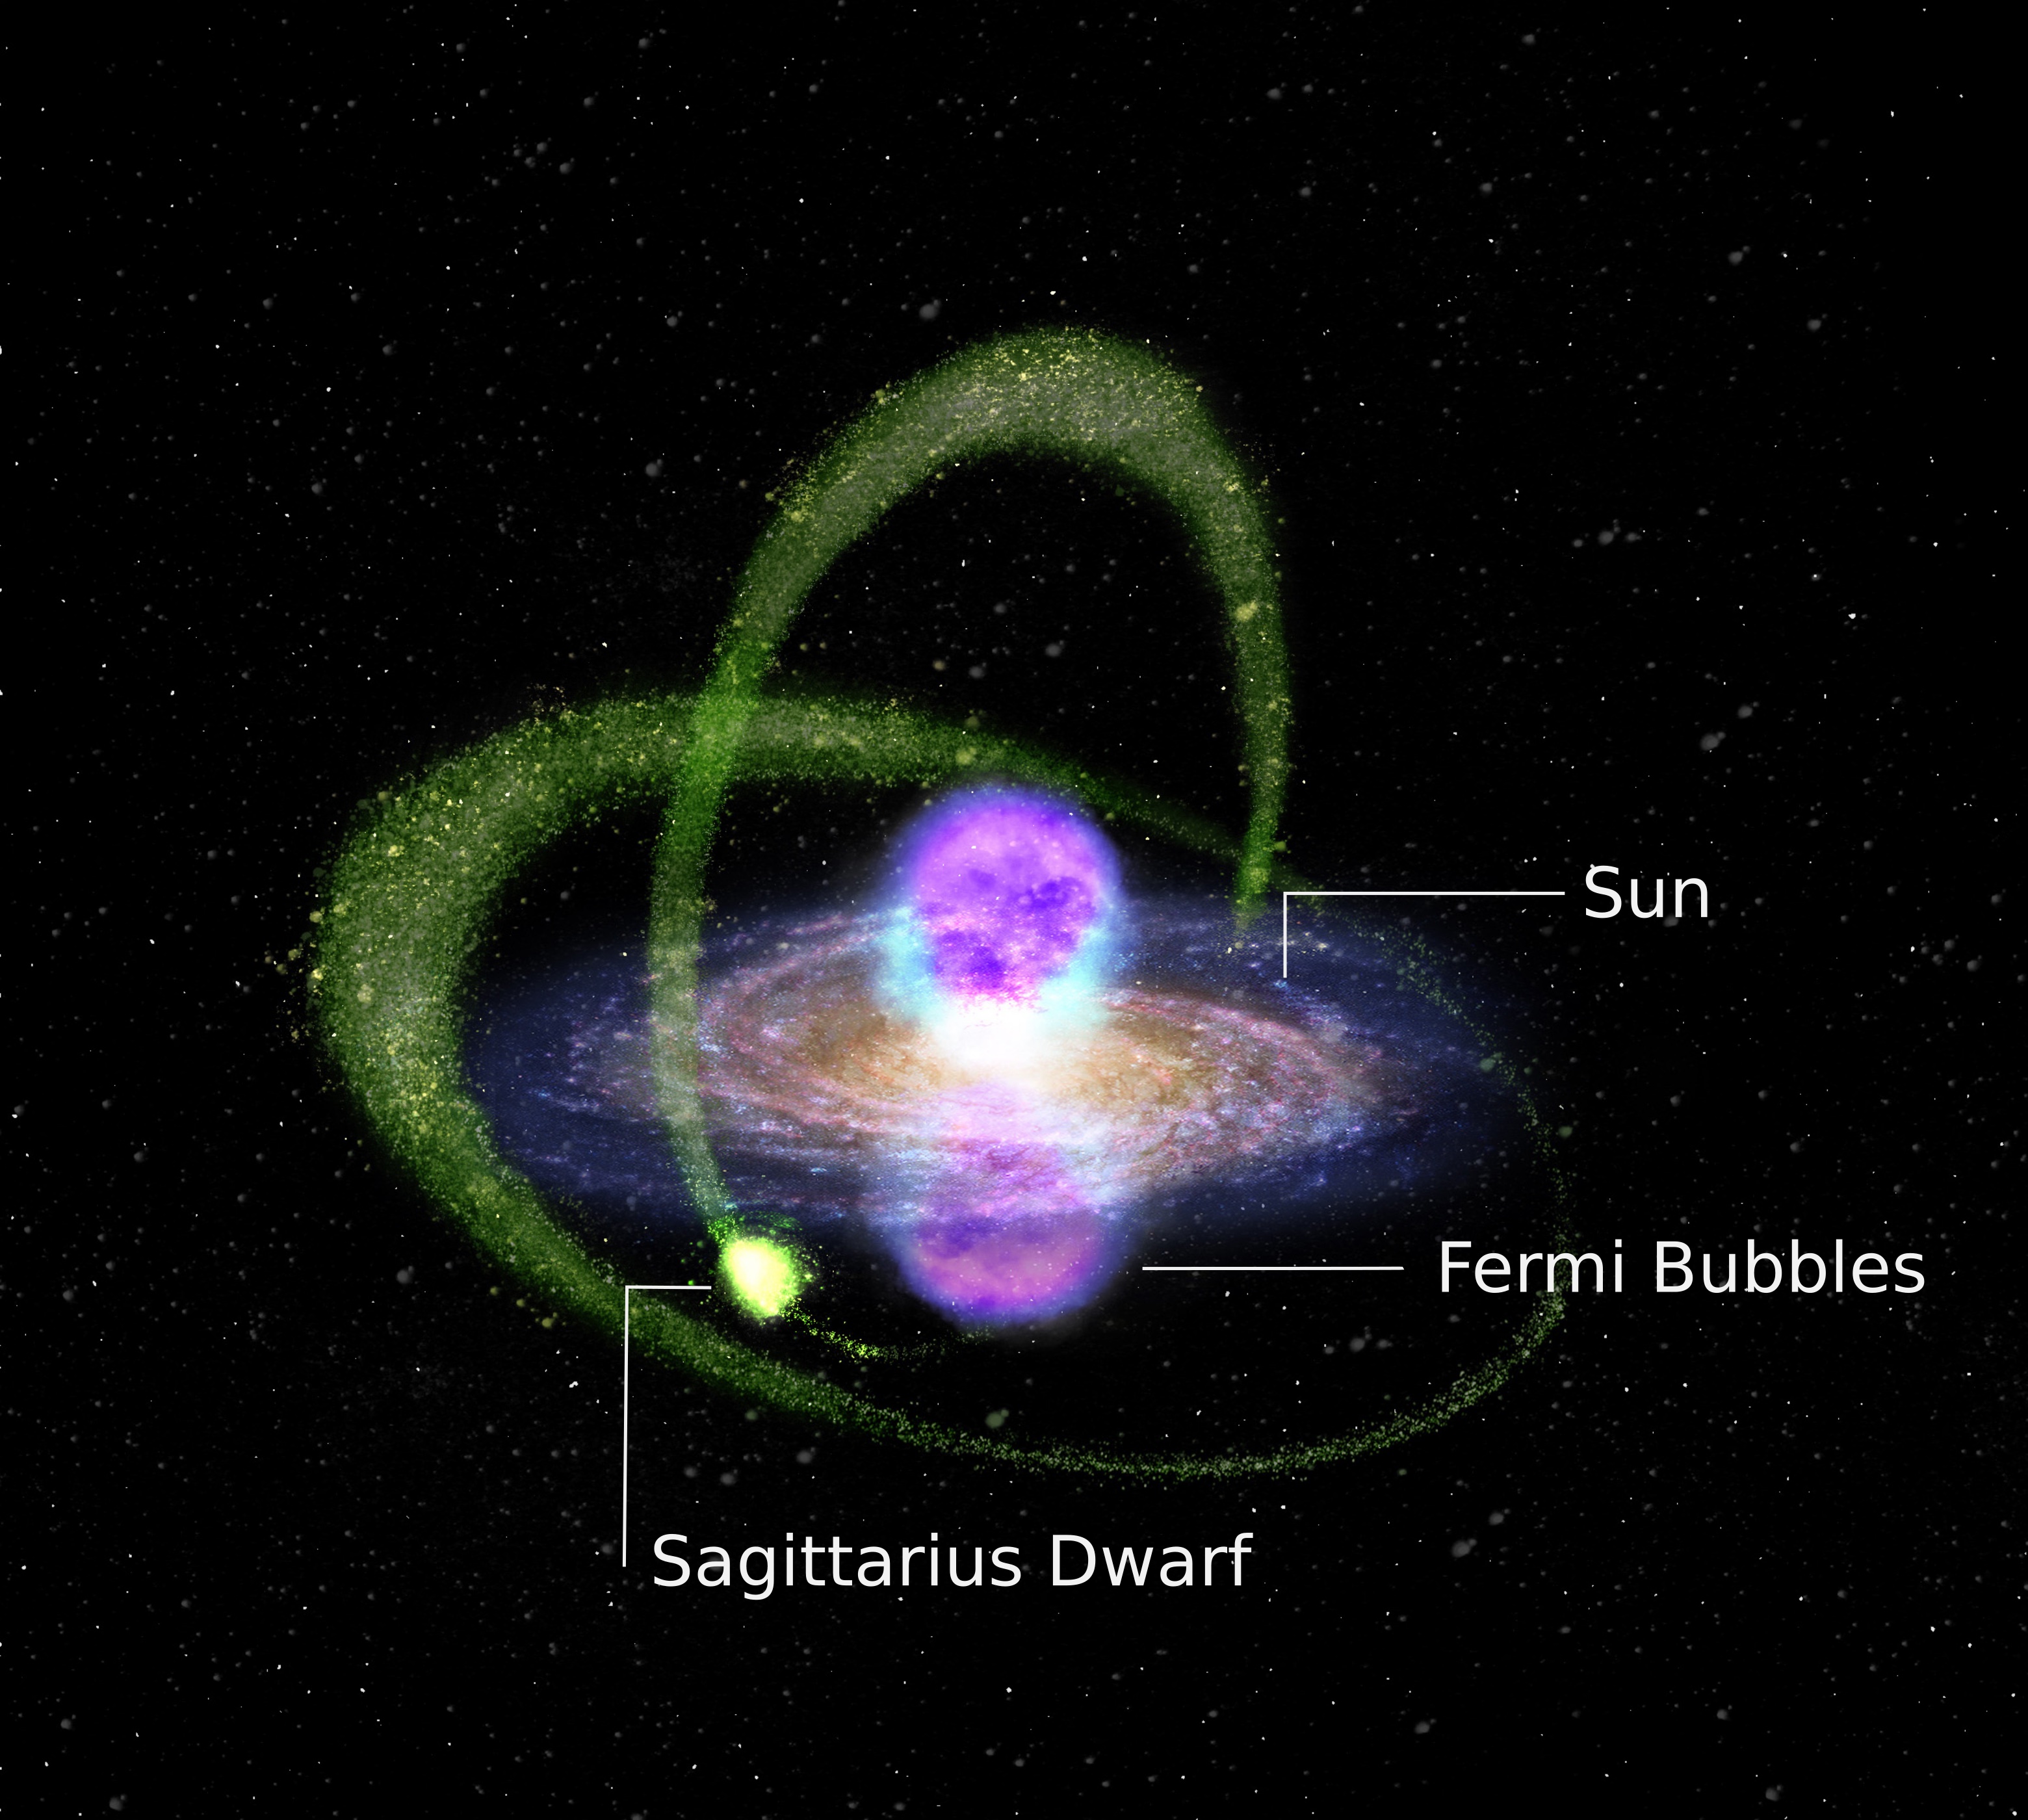 Schematic showing the Milky Way, the gamma-ray-emitting Fermi Bubbles (pink), and the Sagittarius dwarf galaxy and its tails (yellow/green). From the position of the Sun, we view the Sagittarius dwarf through the southern Fermi Bubble.